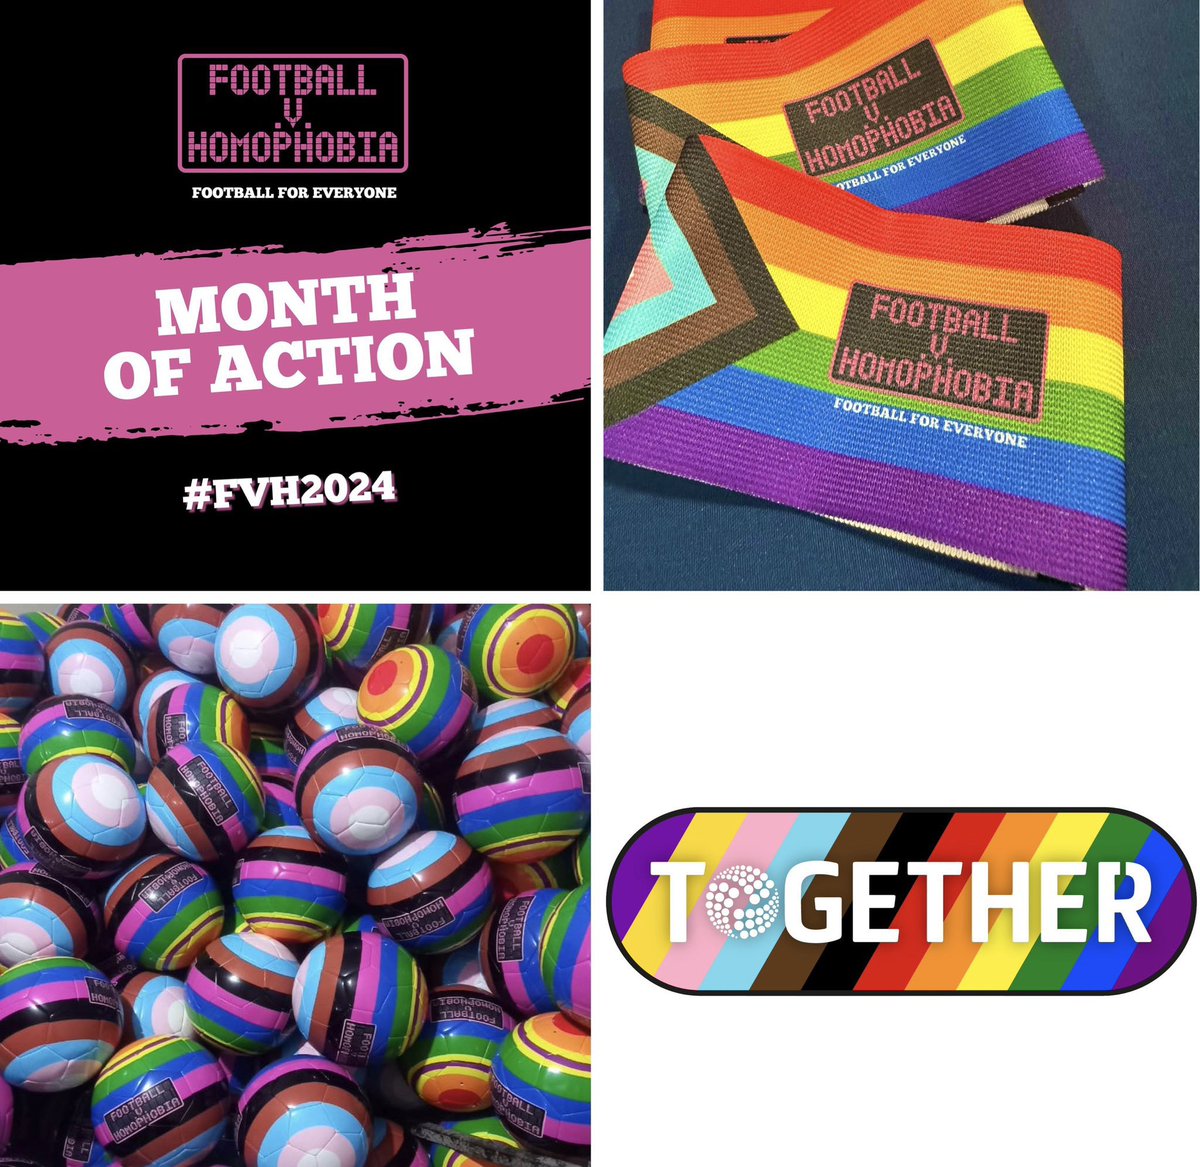 February marks the 𝗙𝗼𝗼𝘁𝗯𝗮𝗹𝗹 𝘃 𝗛𝗼𝗺𝗼𝗽𝗵𝗼𝗯𝗶𝗮 month of action! ⚽️🏳️‍🌈

Proud Tartan Army continues to work with the SFA and other supporters’ groups to tackle all forms of discrimination in sport 🤝

Learn more about the campaign at footballvhomophobia.com

#FvH2024